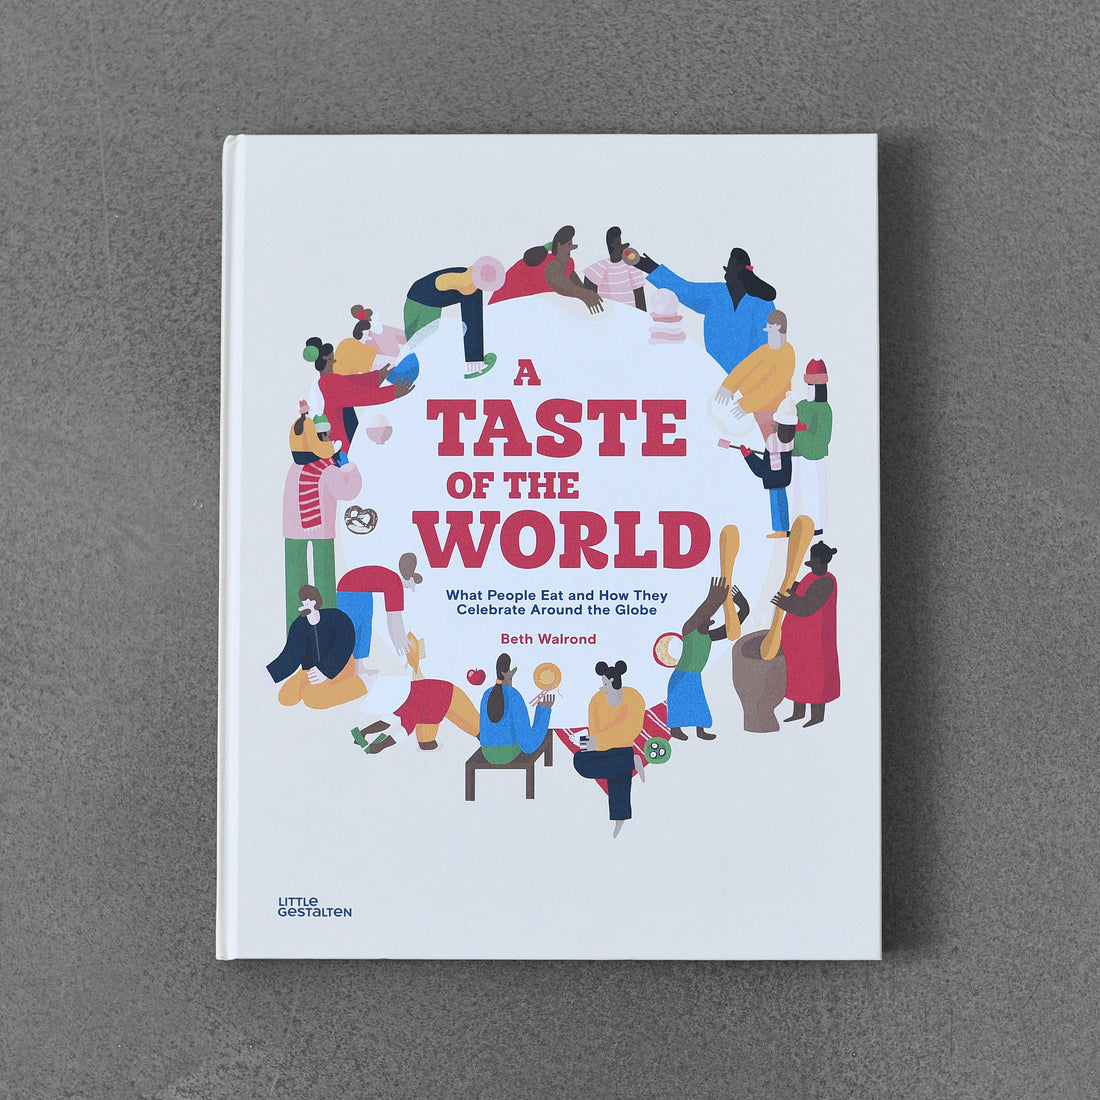 A Taste of The World: What People Eat and How They Celebrate Around The Globe